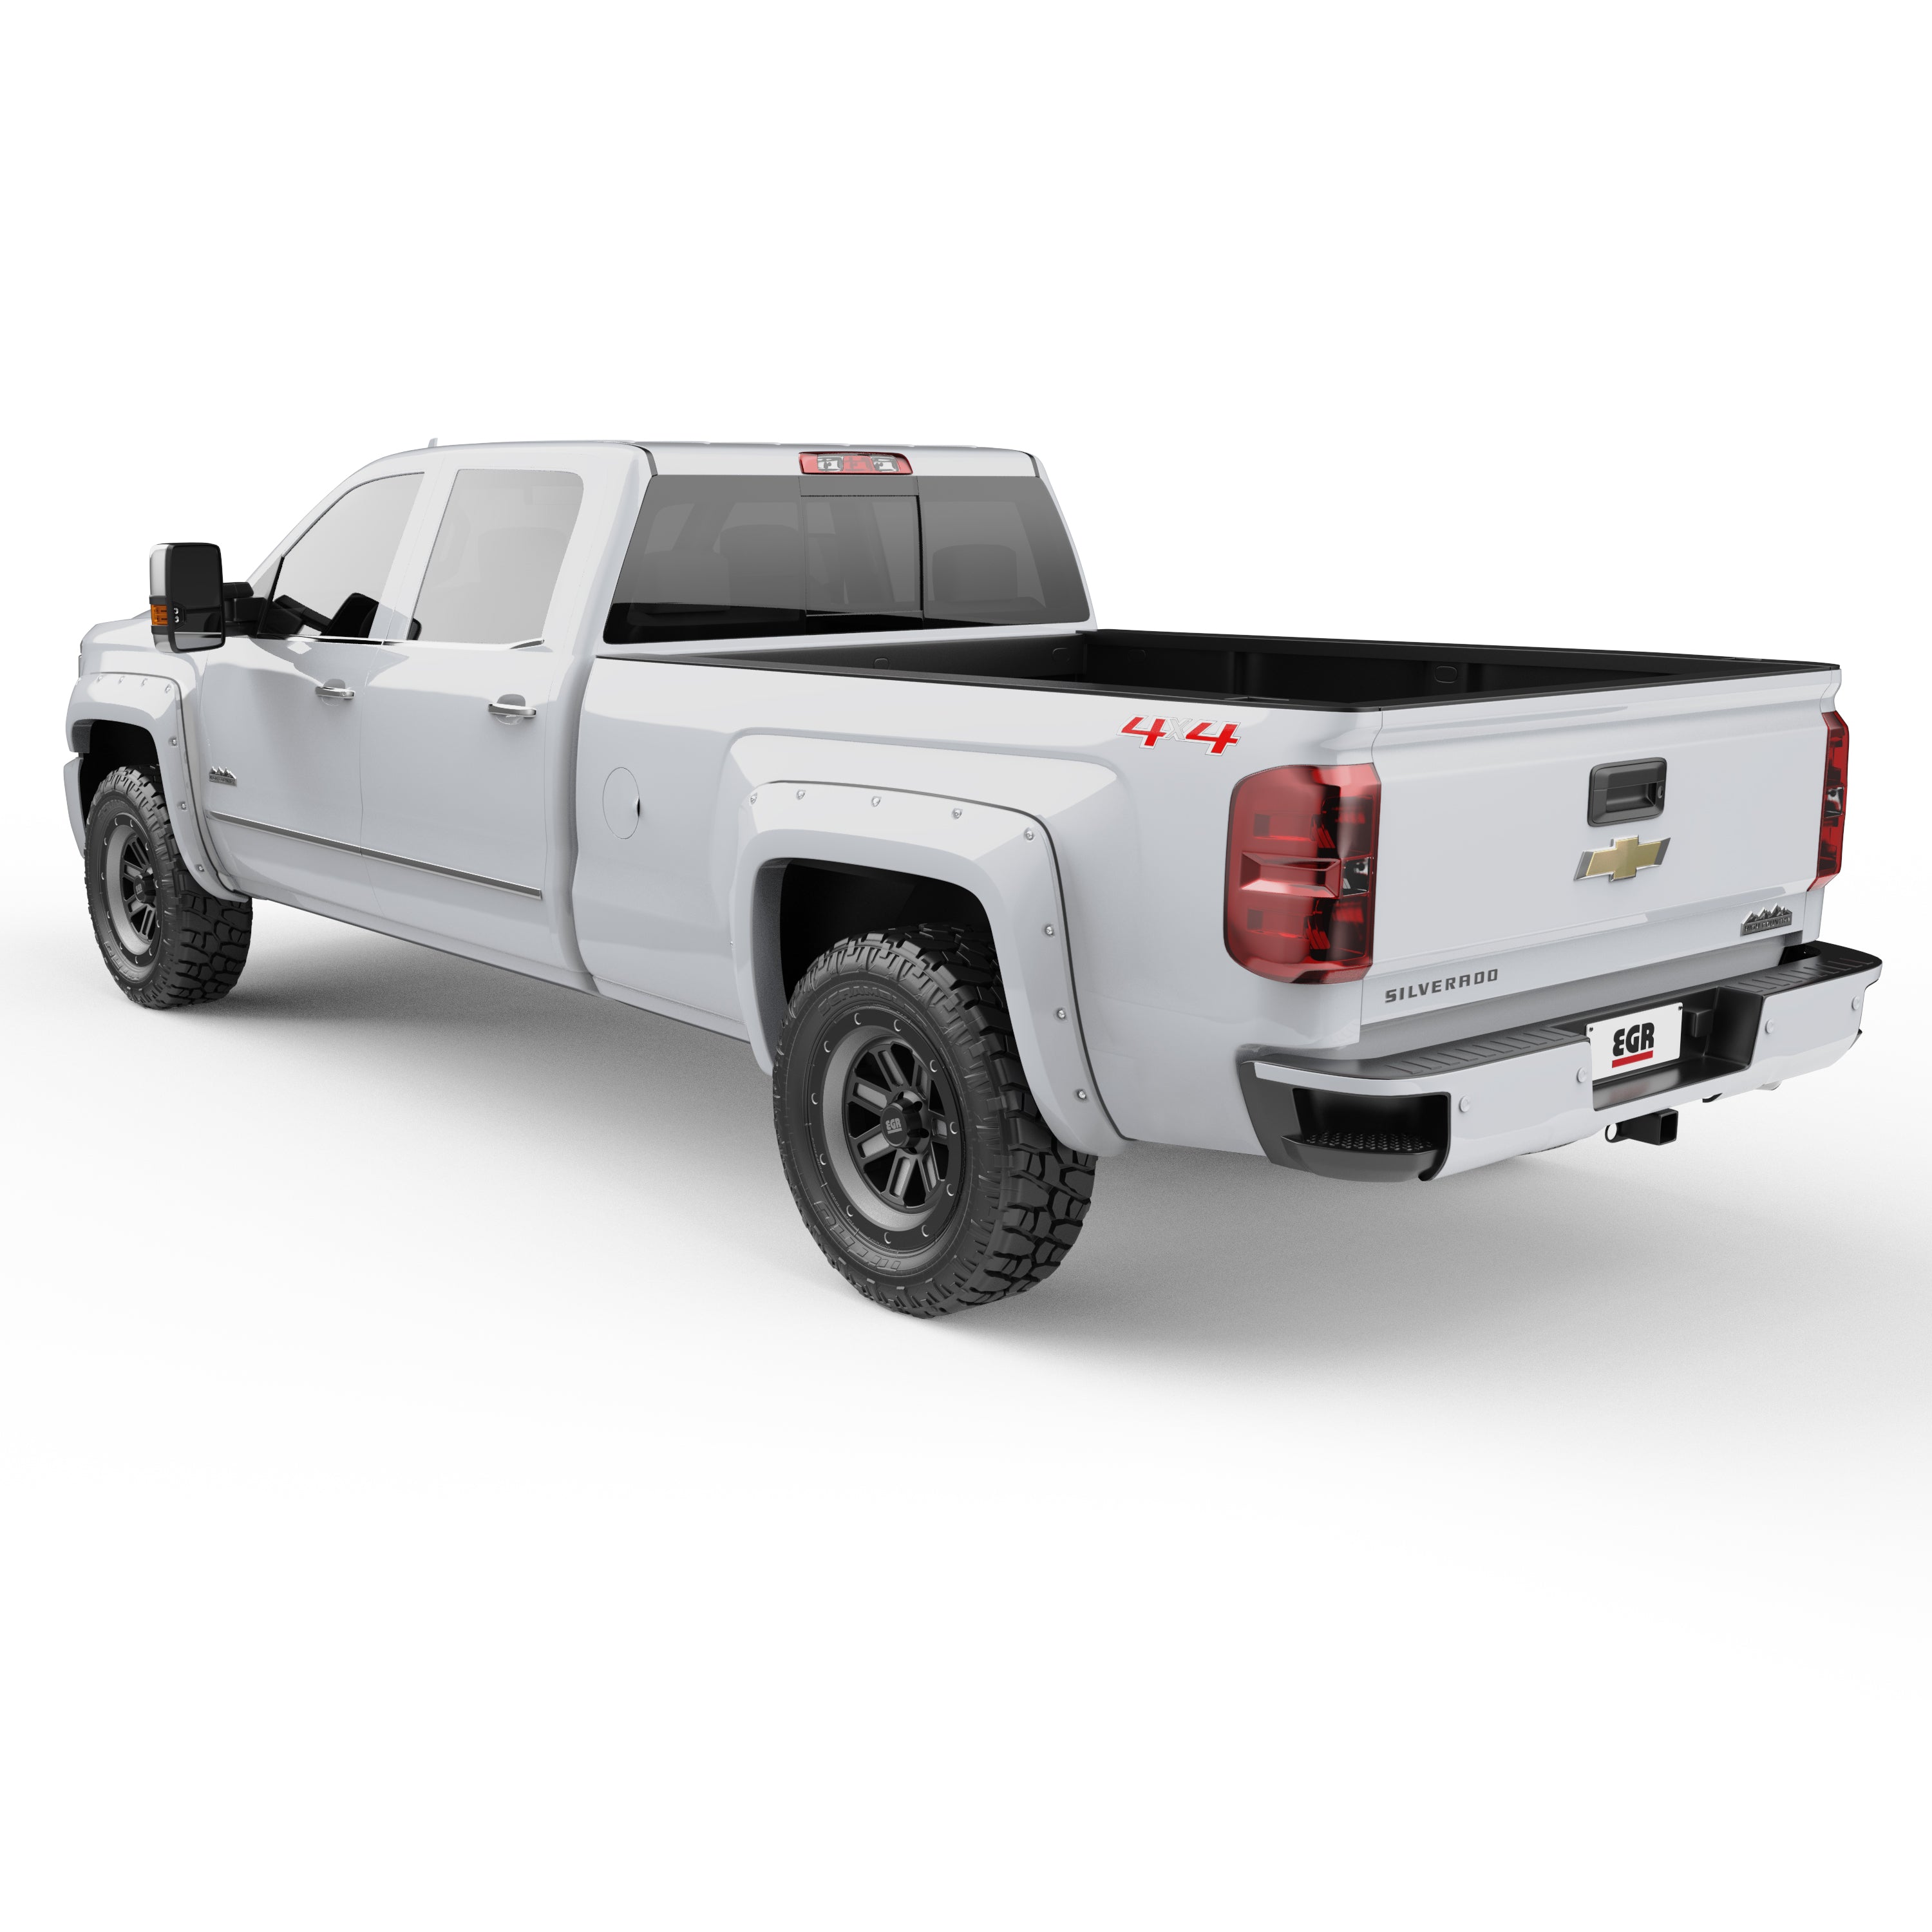 EGR Traditional Bolt-on look Fender Flares 14-18 Chevrolet Silverado 1500 15-19 Chevrolet Silverado 2500HD & 3500HD Painted to Code - Summit White set of 4